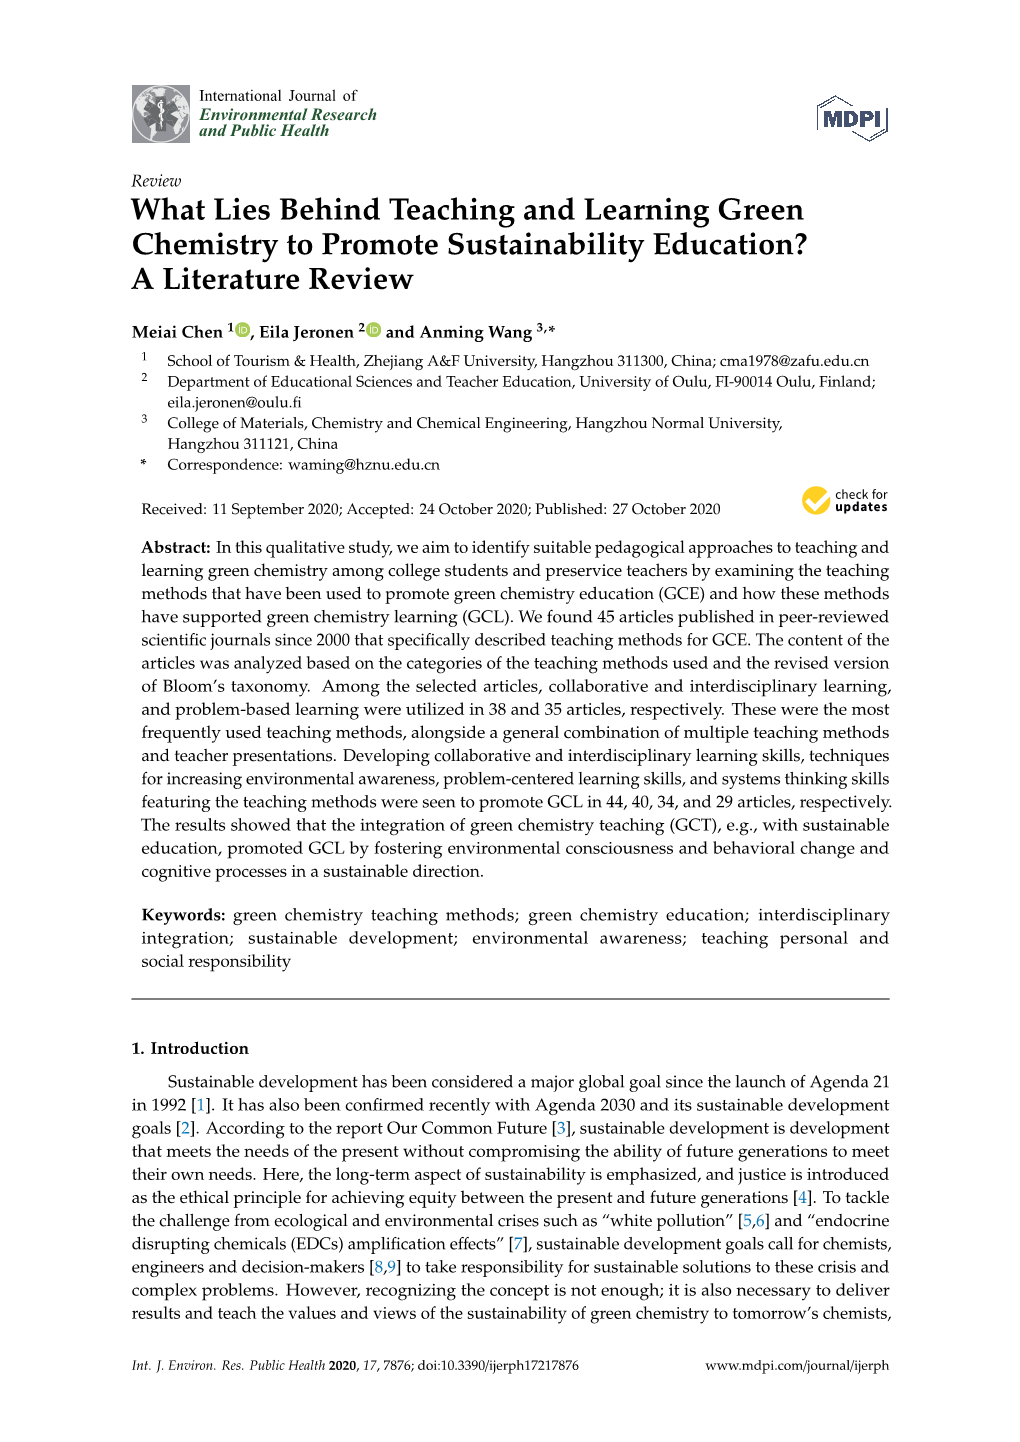 What Lies Behind Teaching and Learning Green Chemistry to Promote Sustainability Education? a Literature Review